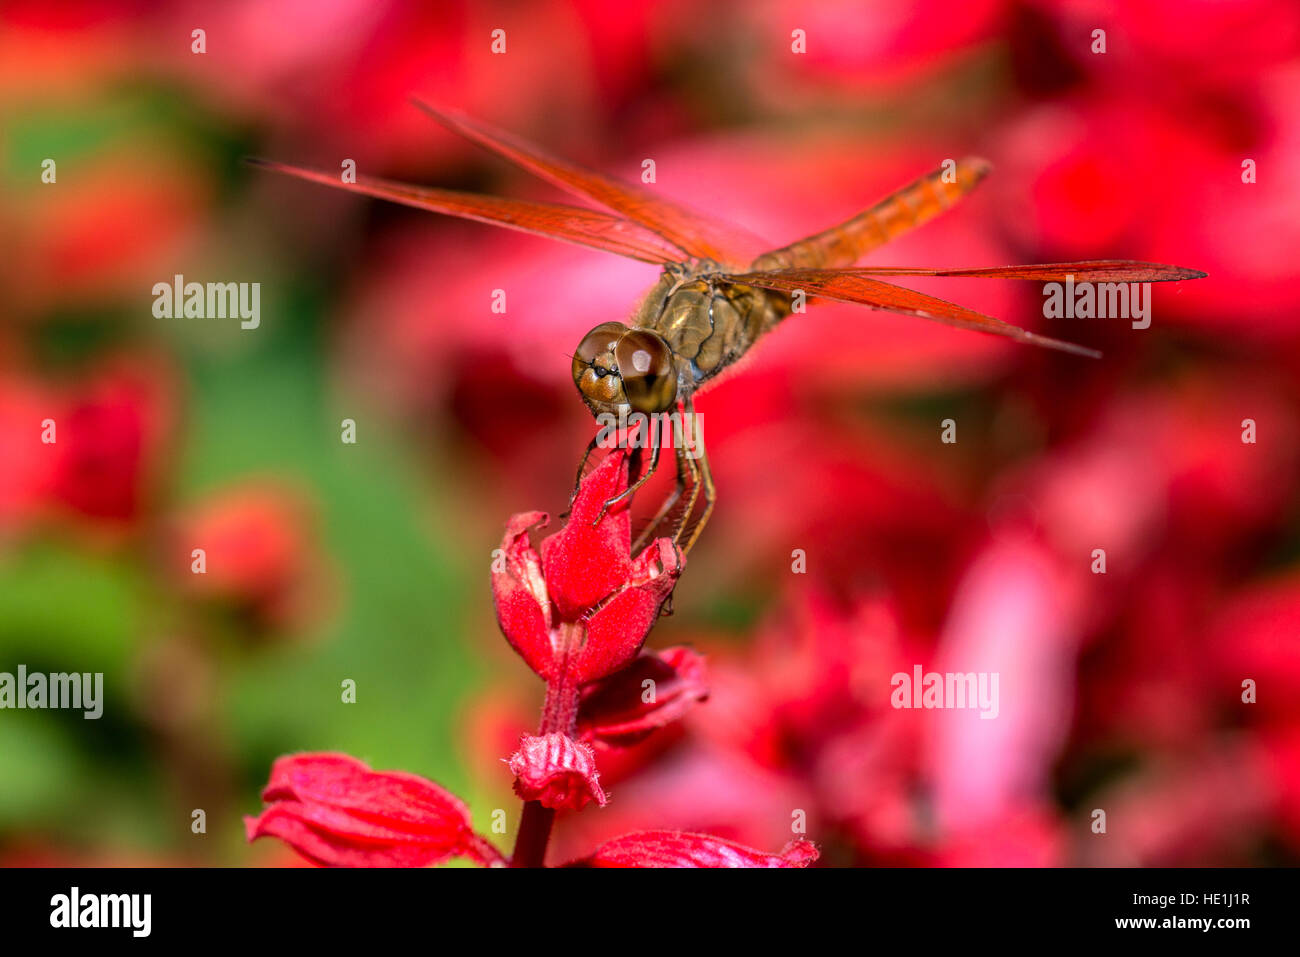 Closeup of dragonfly on red flower Stock Photo